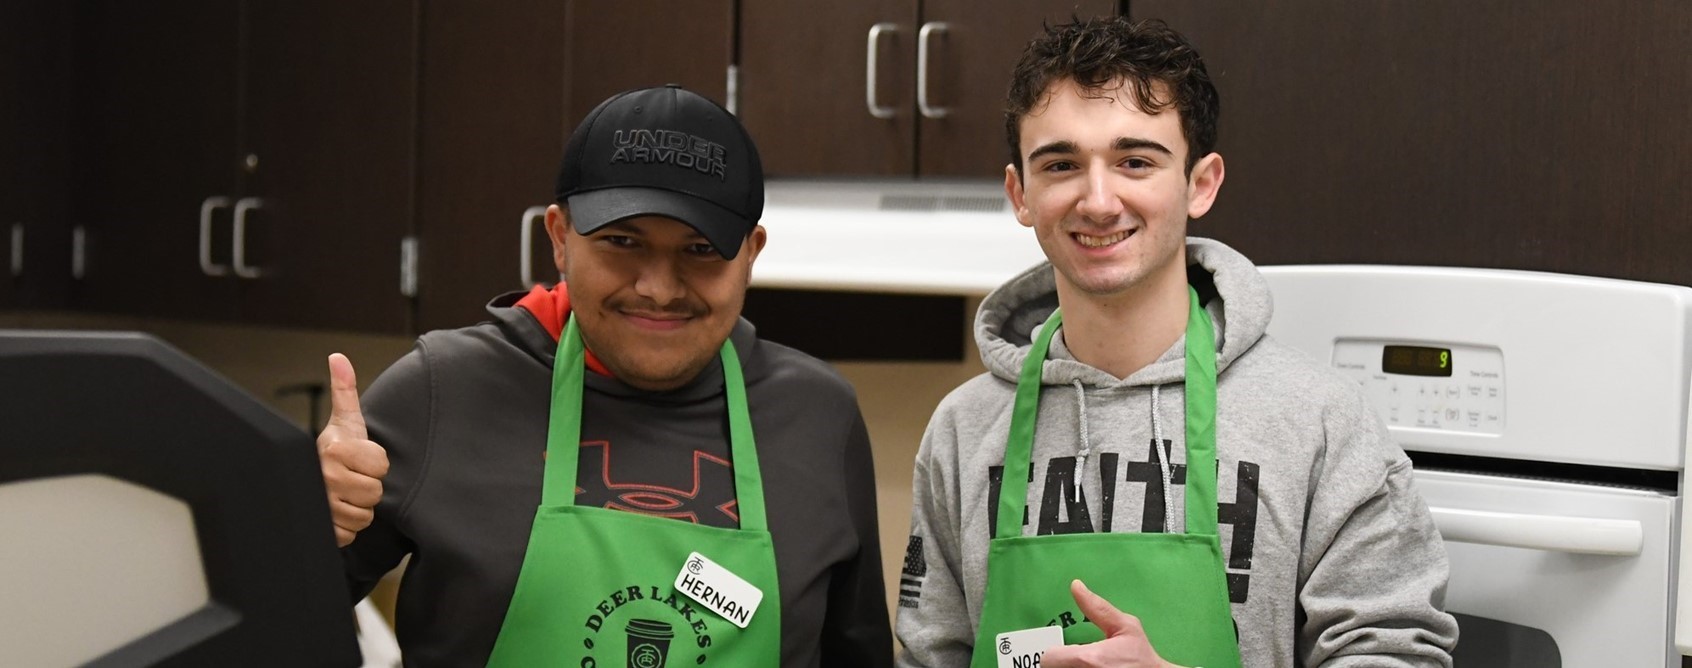 High School Coffee Shop offers new opportunities for students with and without disabilities